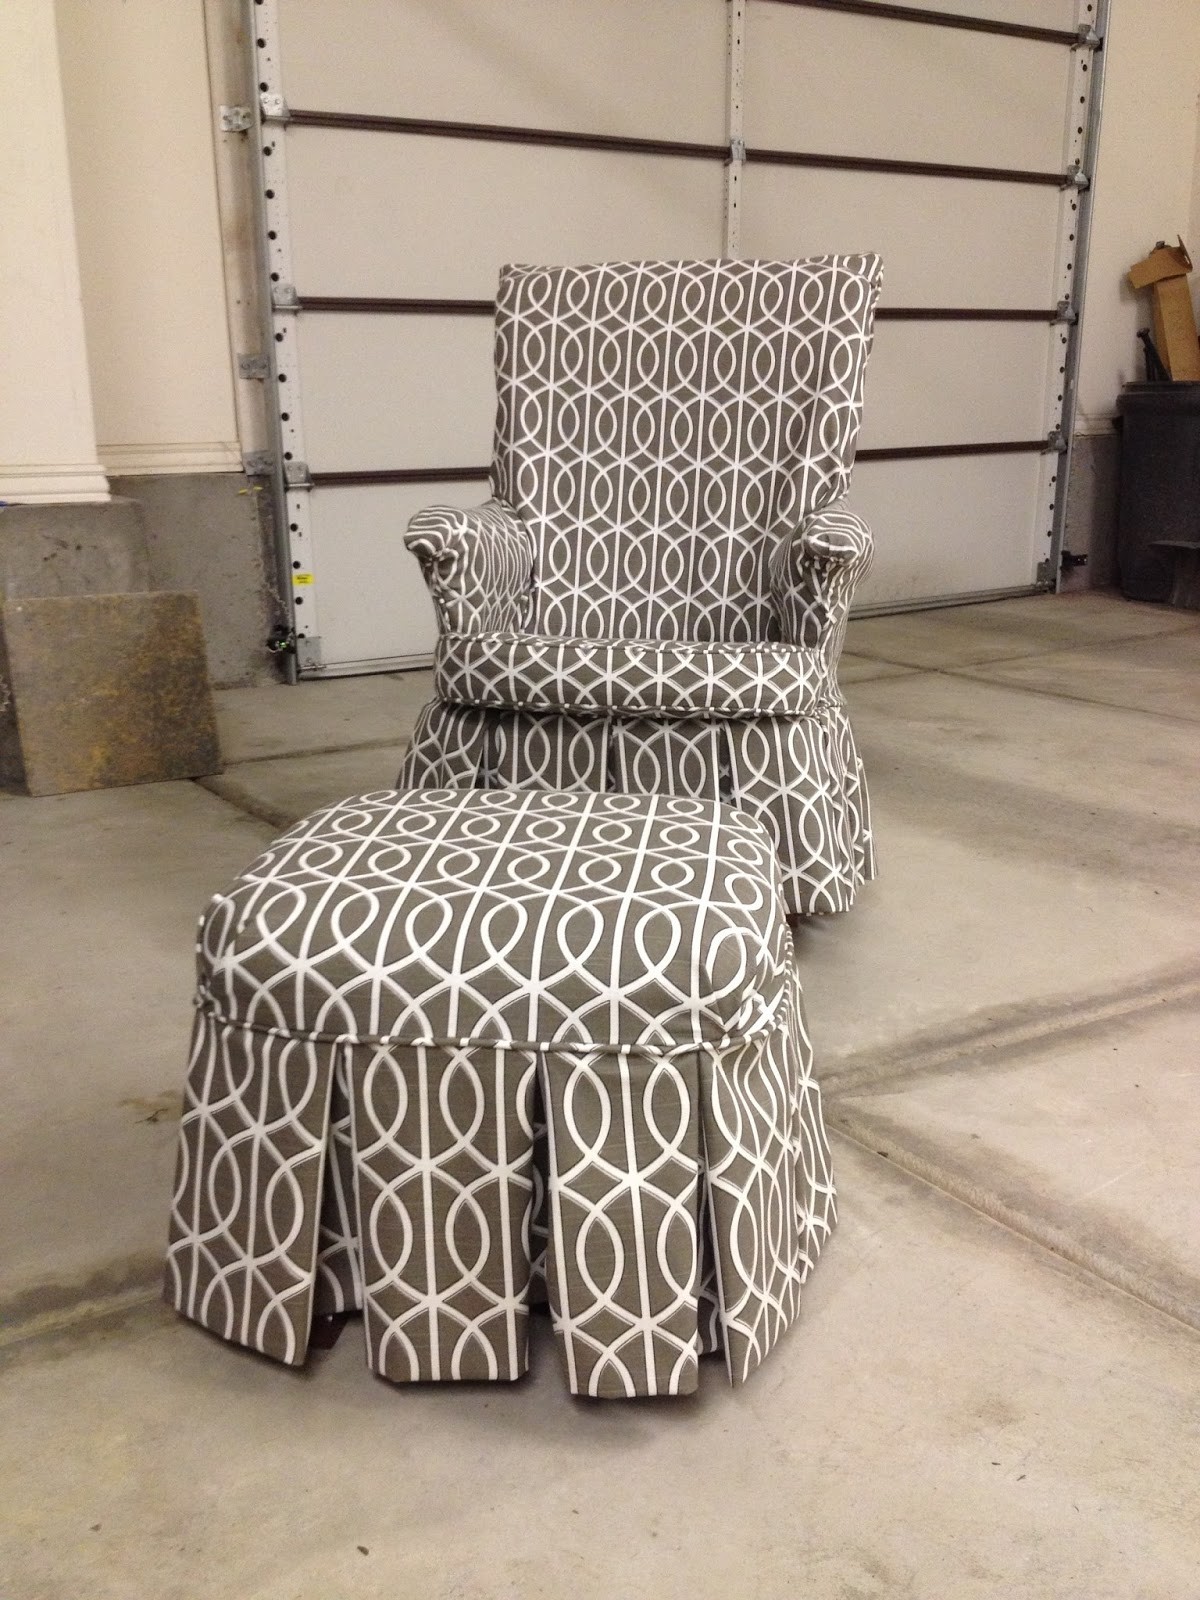 Small chair slipcovers